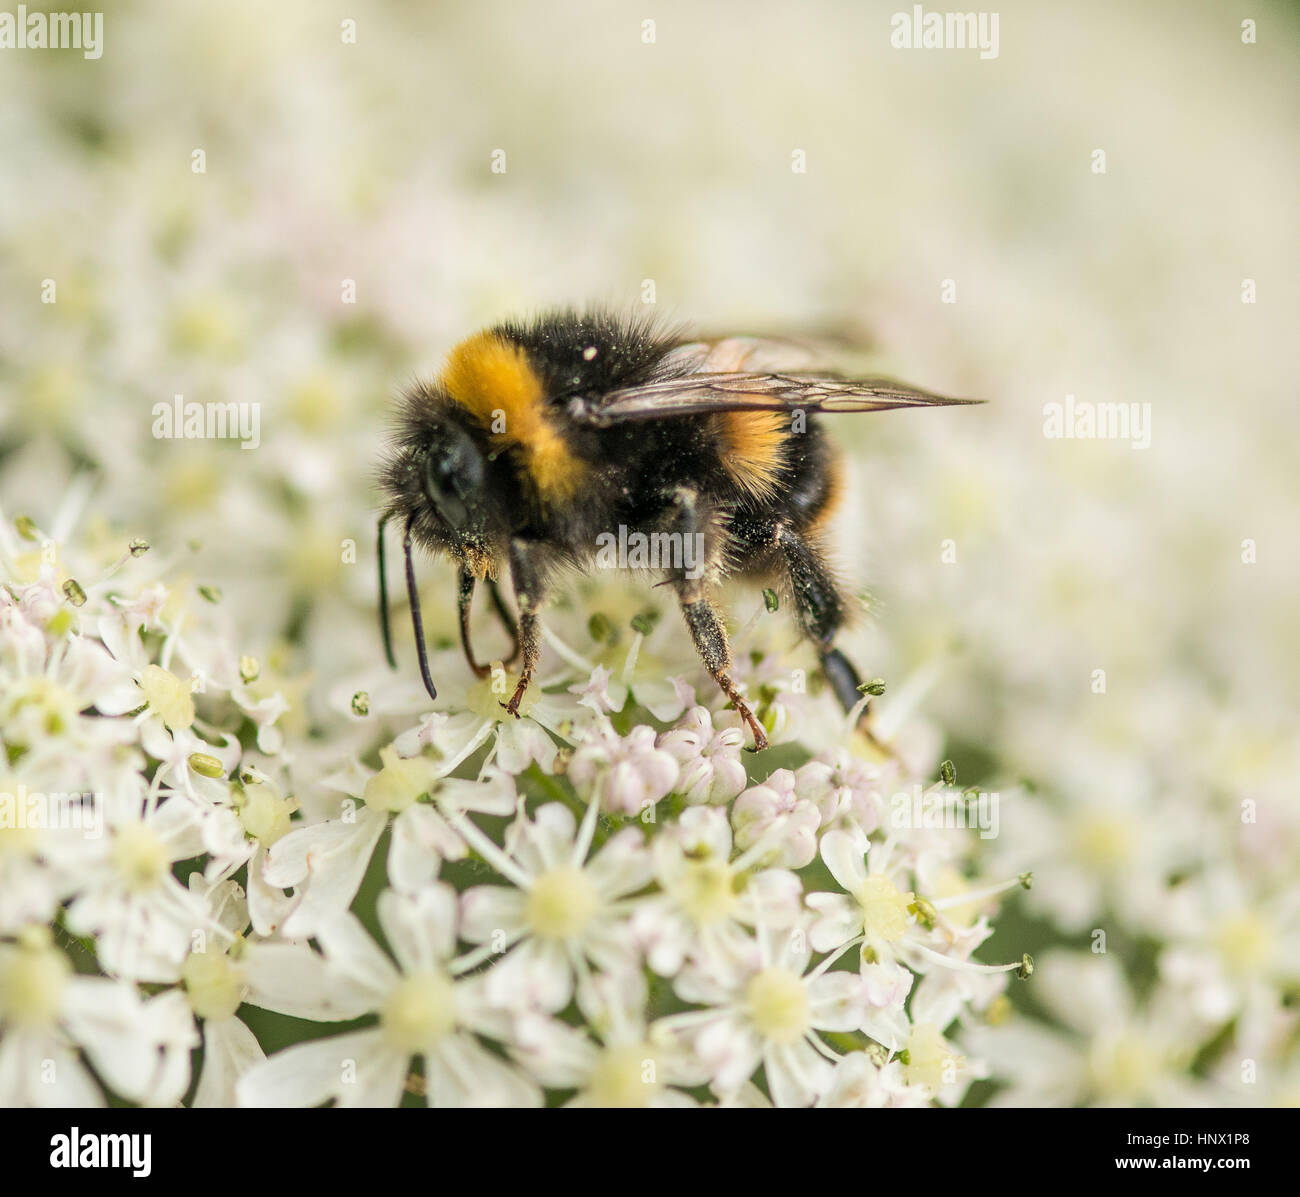 Bumble Bee collecting pollen from the garden flower Stock Photo